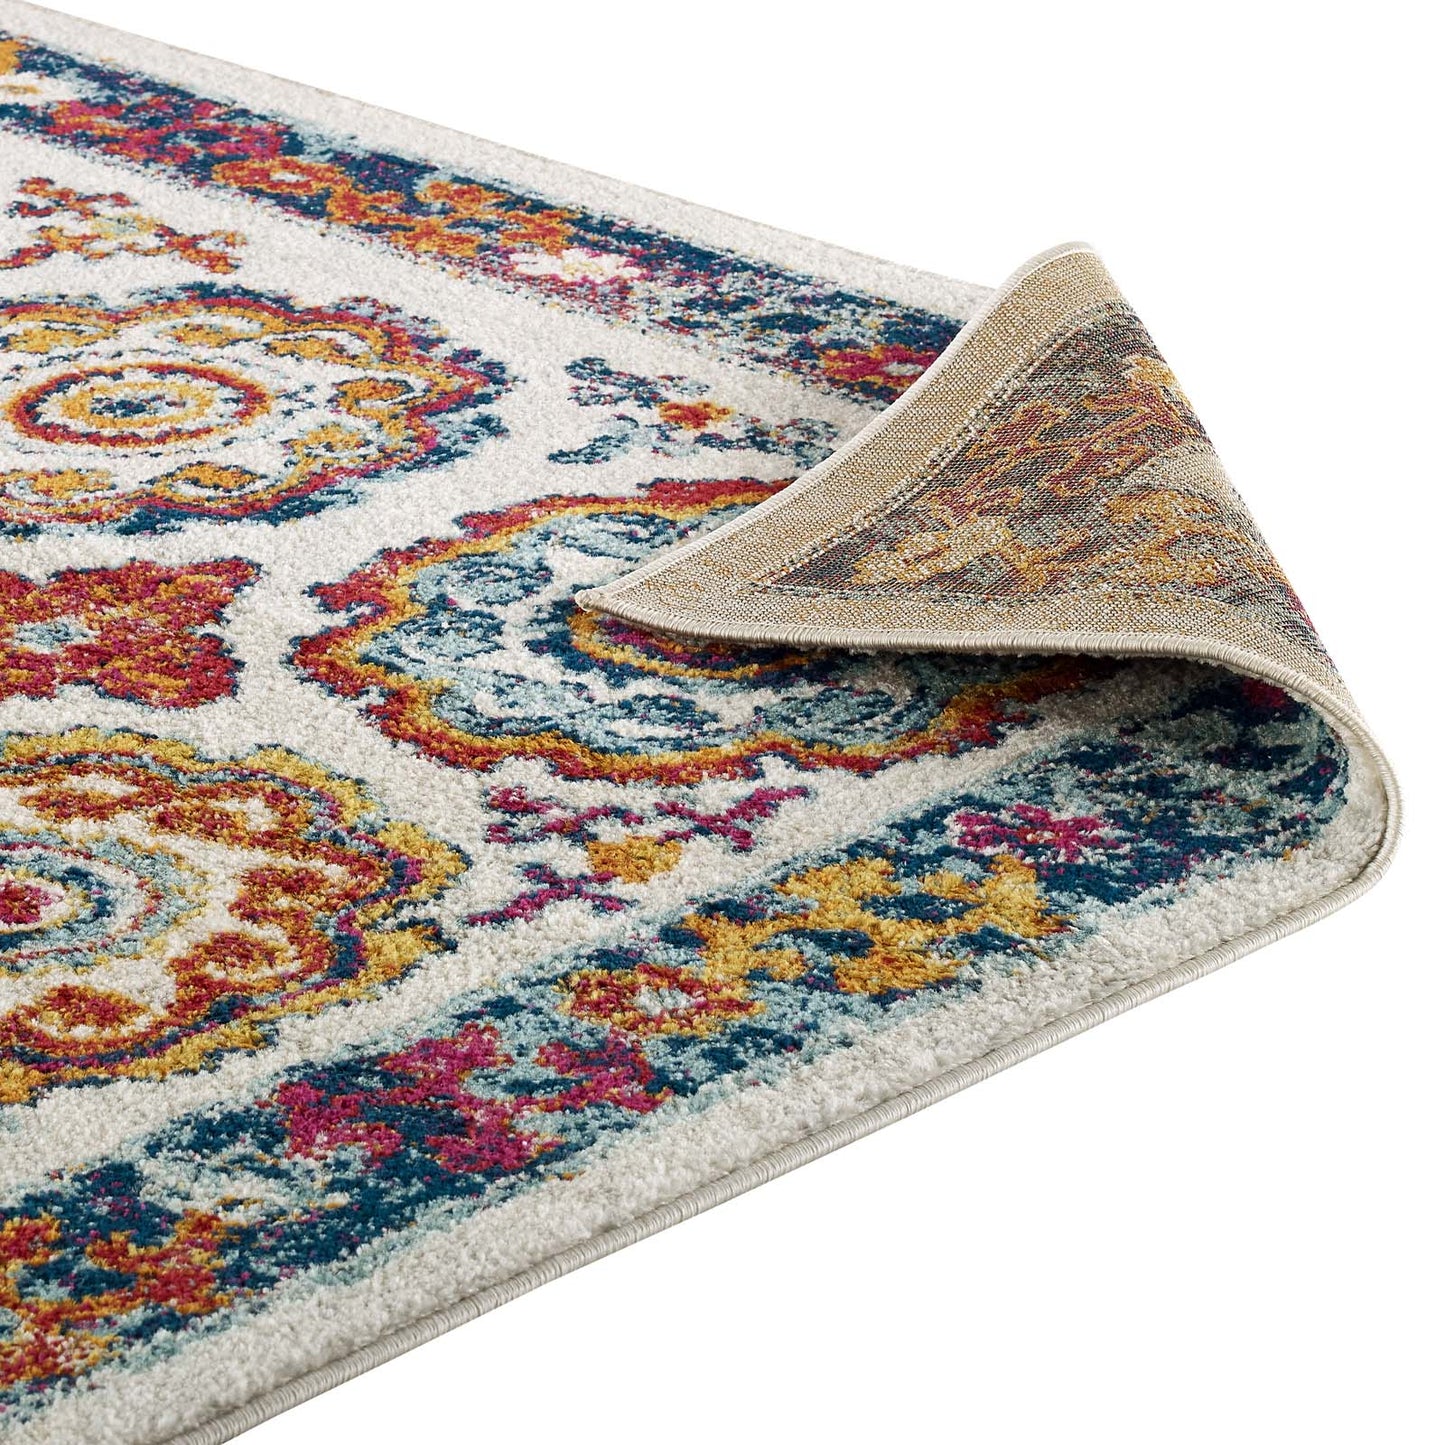 Entourage Odile Distressed Floral Moroccan Trellis 5x8 Area Rug Ivory, Blue, Red, Orange, Yellow R-1168A-58